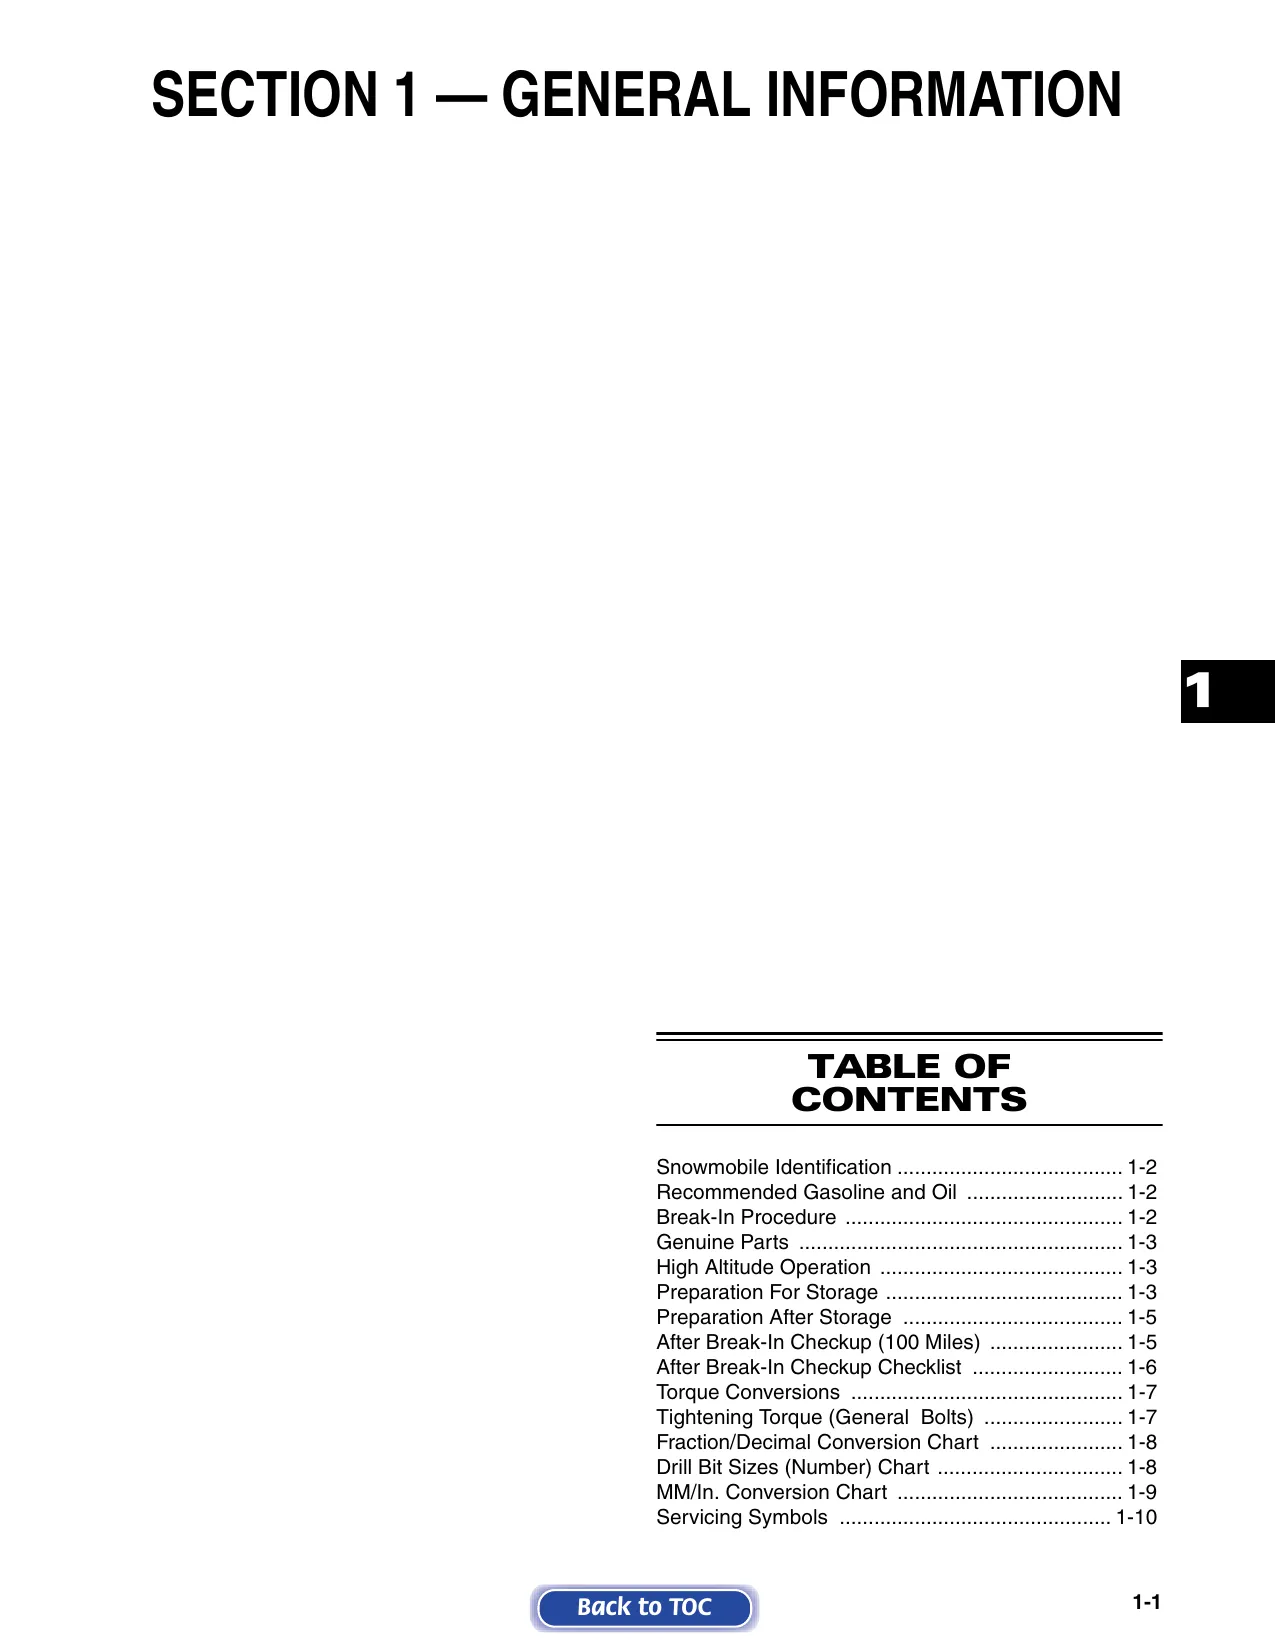 2006 Arctic Cat snowmobile service manual Preview image 3